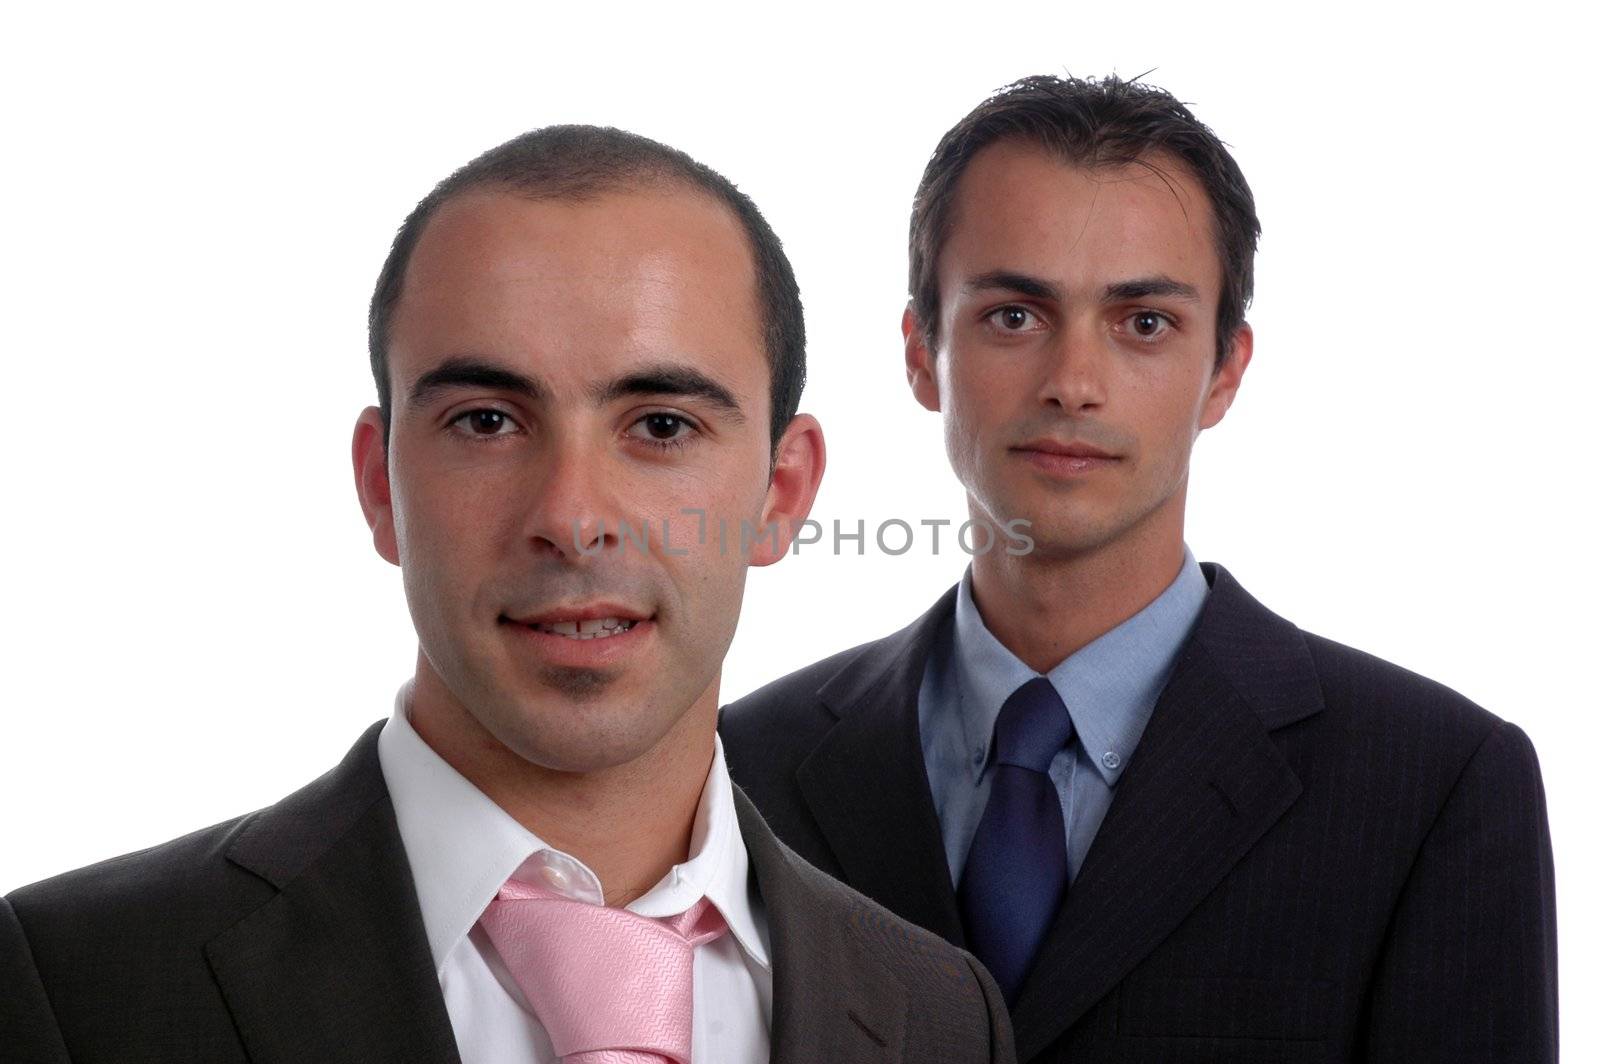 two young business men portrait isolated on white